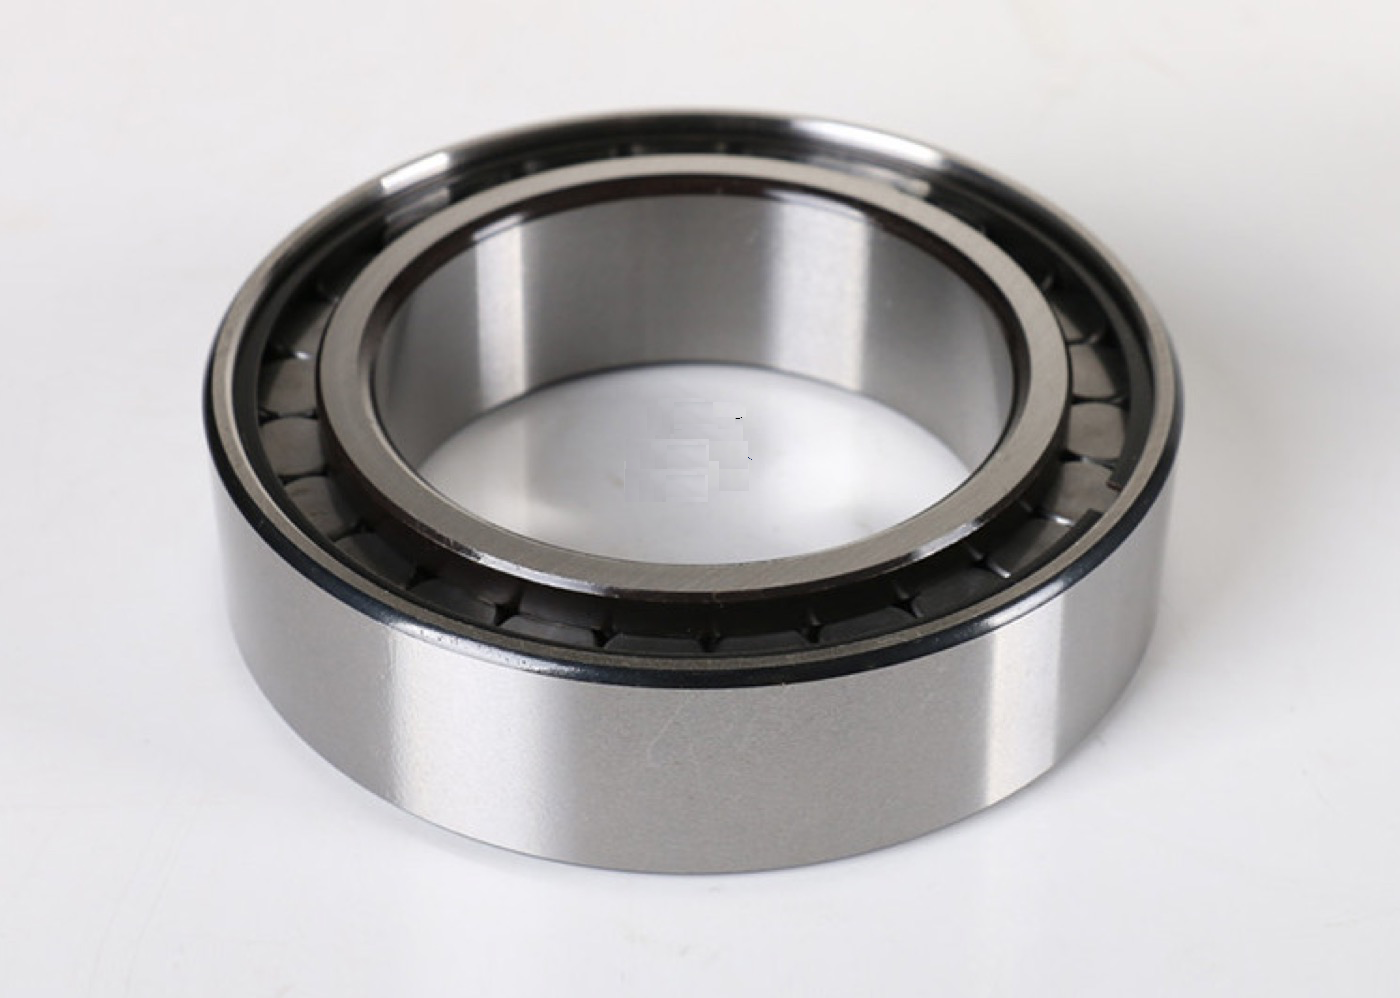 SL04300PP GENERIC 300x380x95 Full compliment metric cylindrical roller bearing with 2 rubber seals Thumbnail